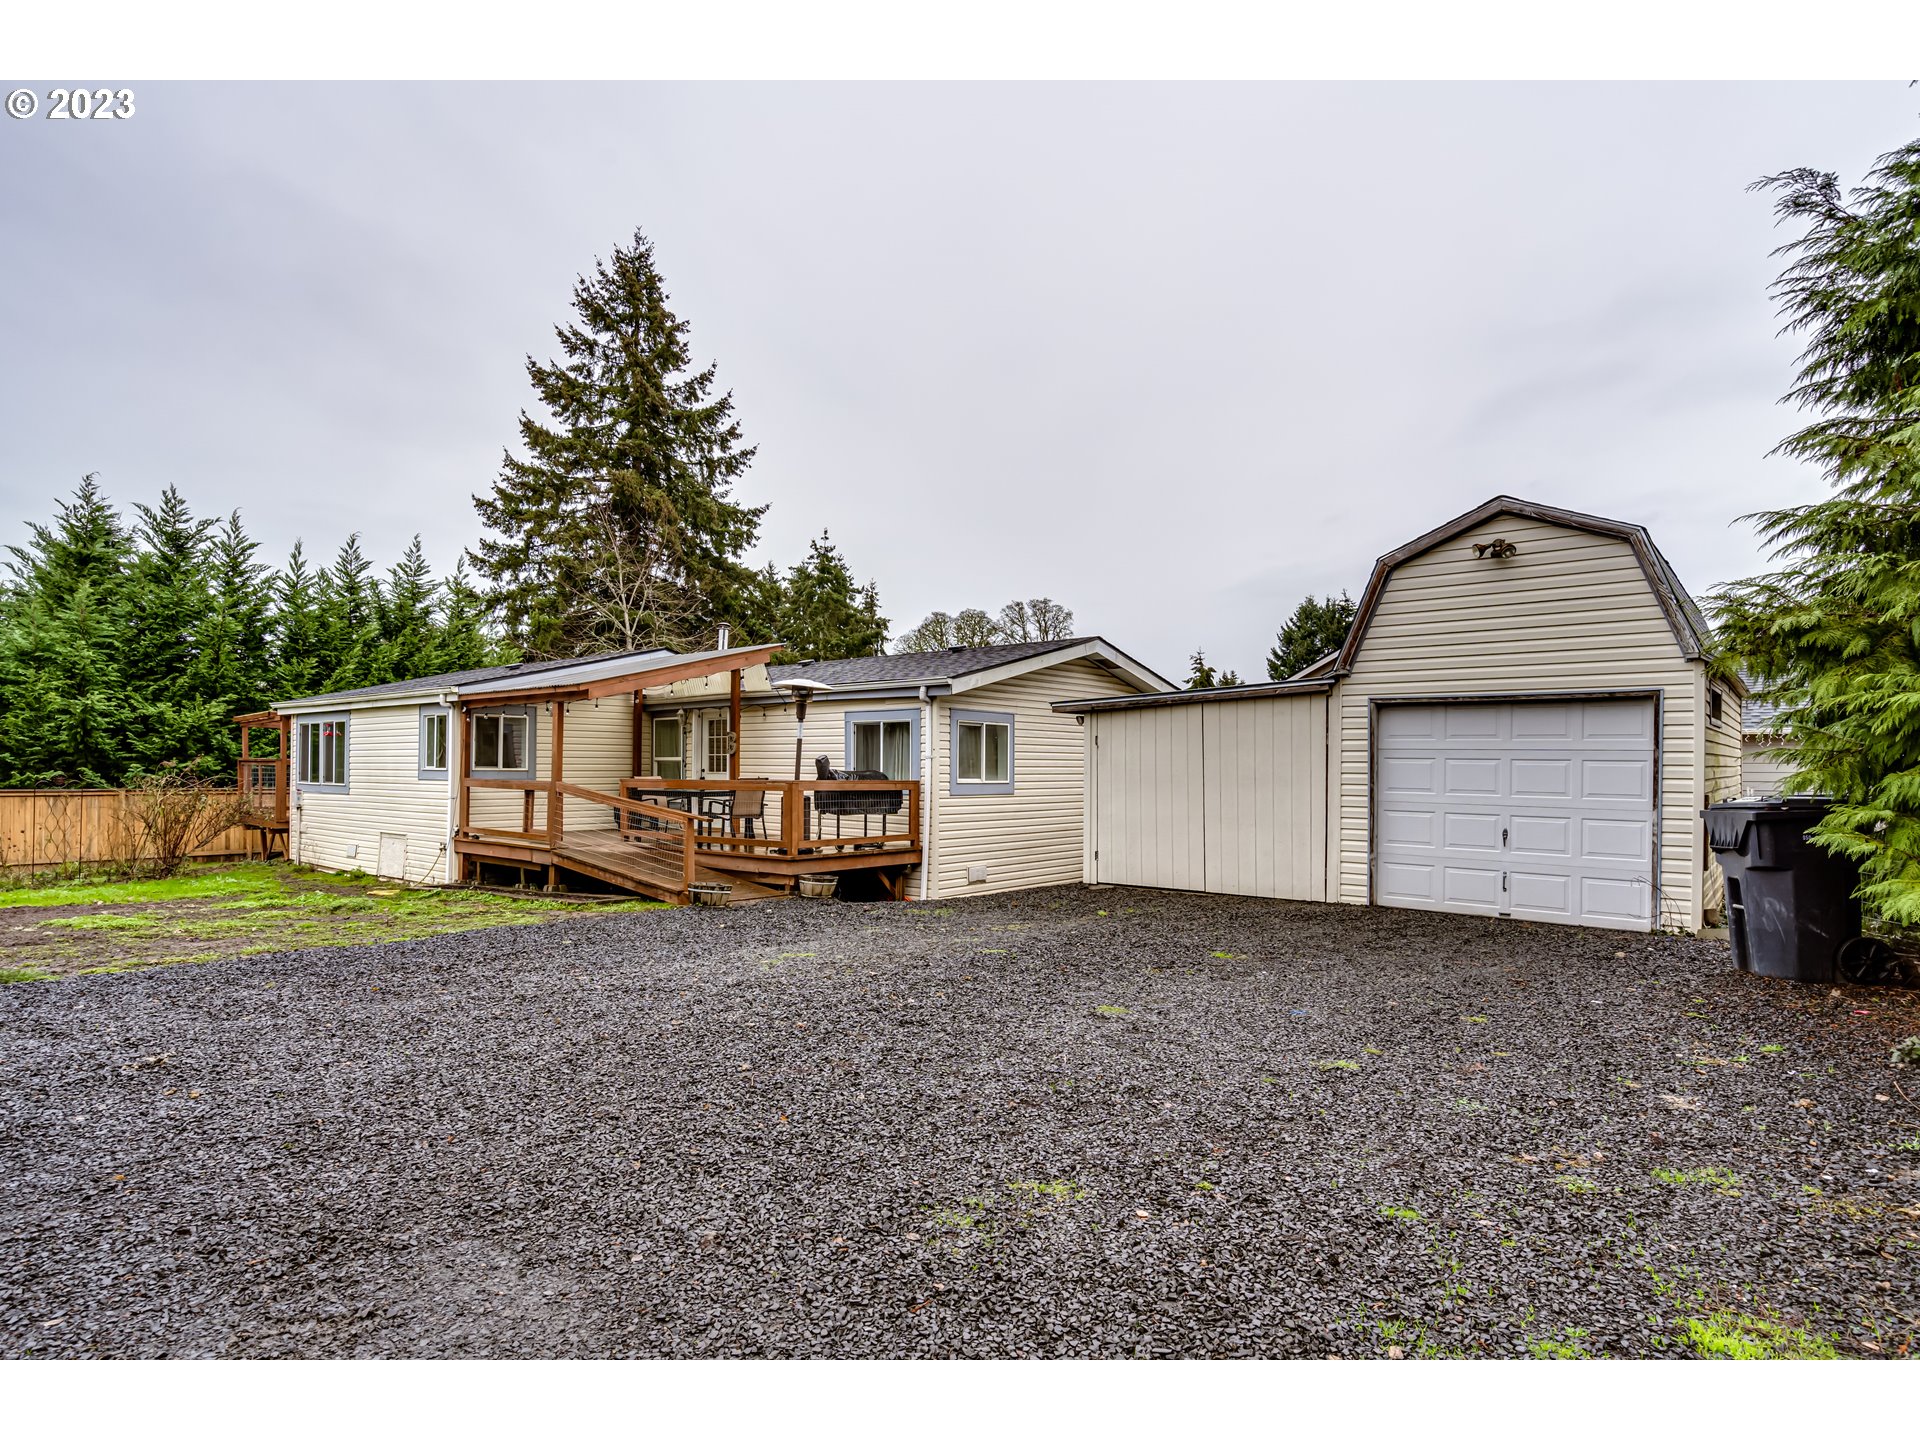 90886 ALVADORE RD, Junction City, OR 97448